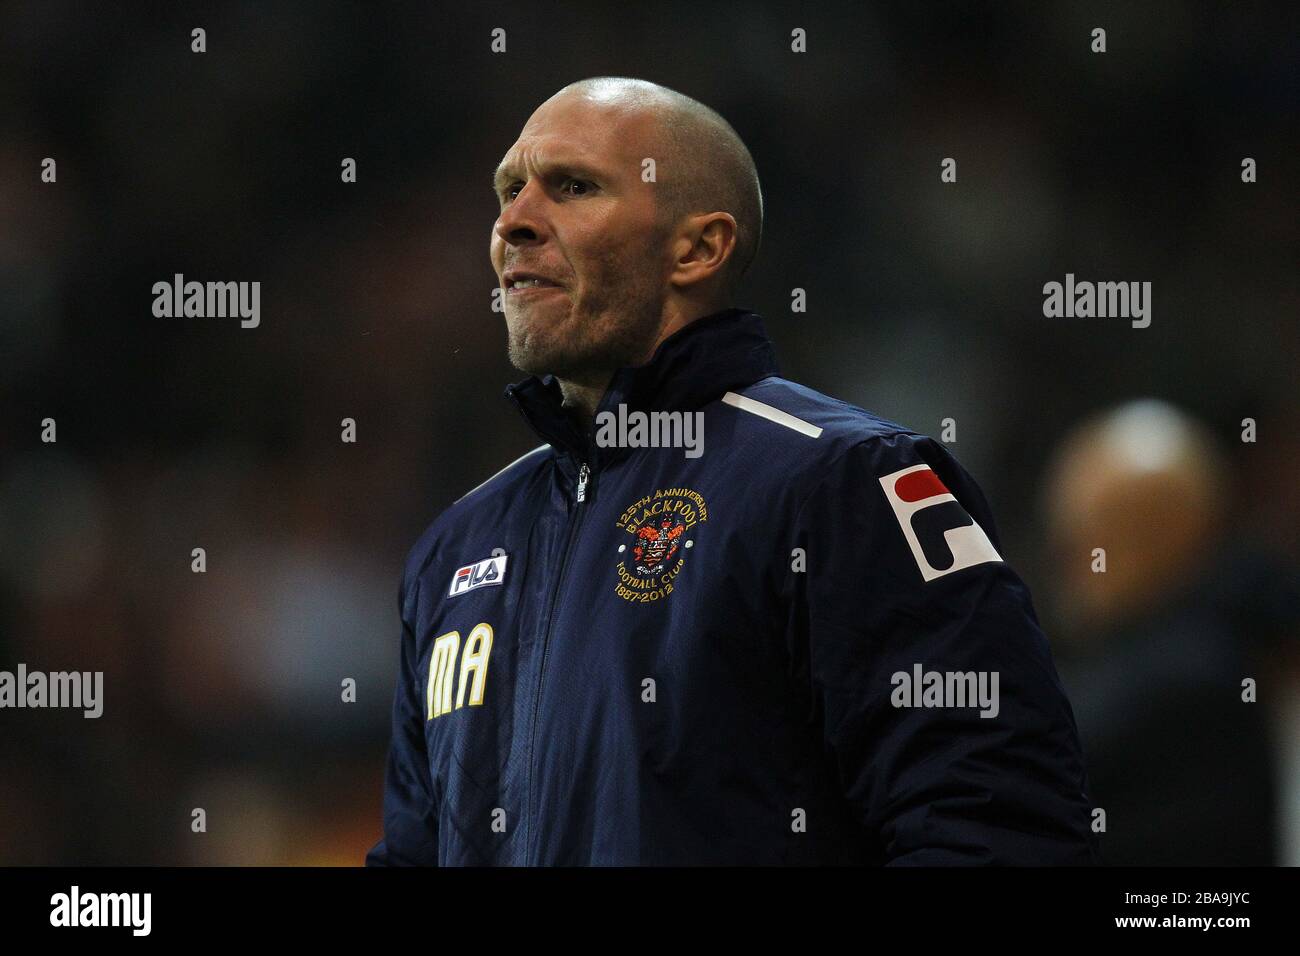 Blackpool's manager Michael Appleton shouts on his team during the game against Wolverhampton Wanderers Stock Photo